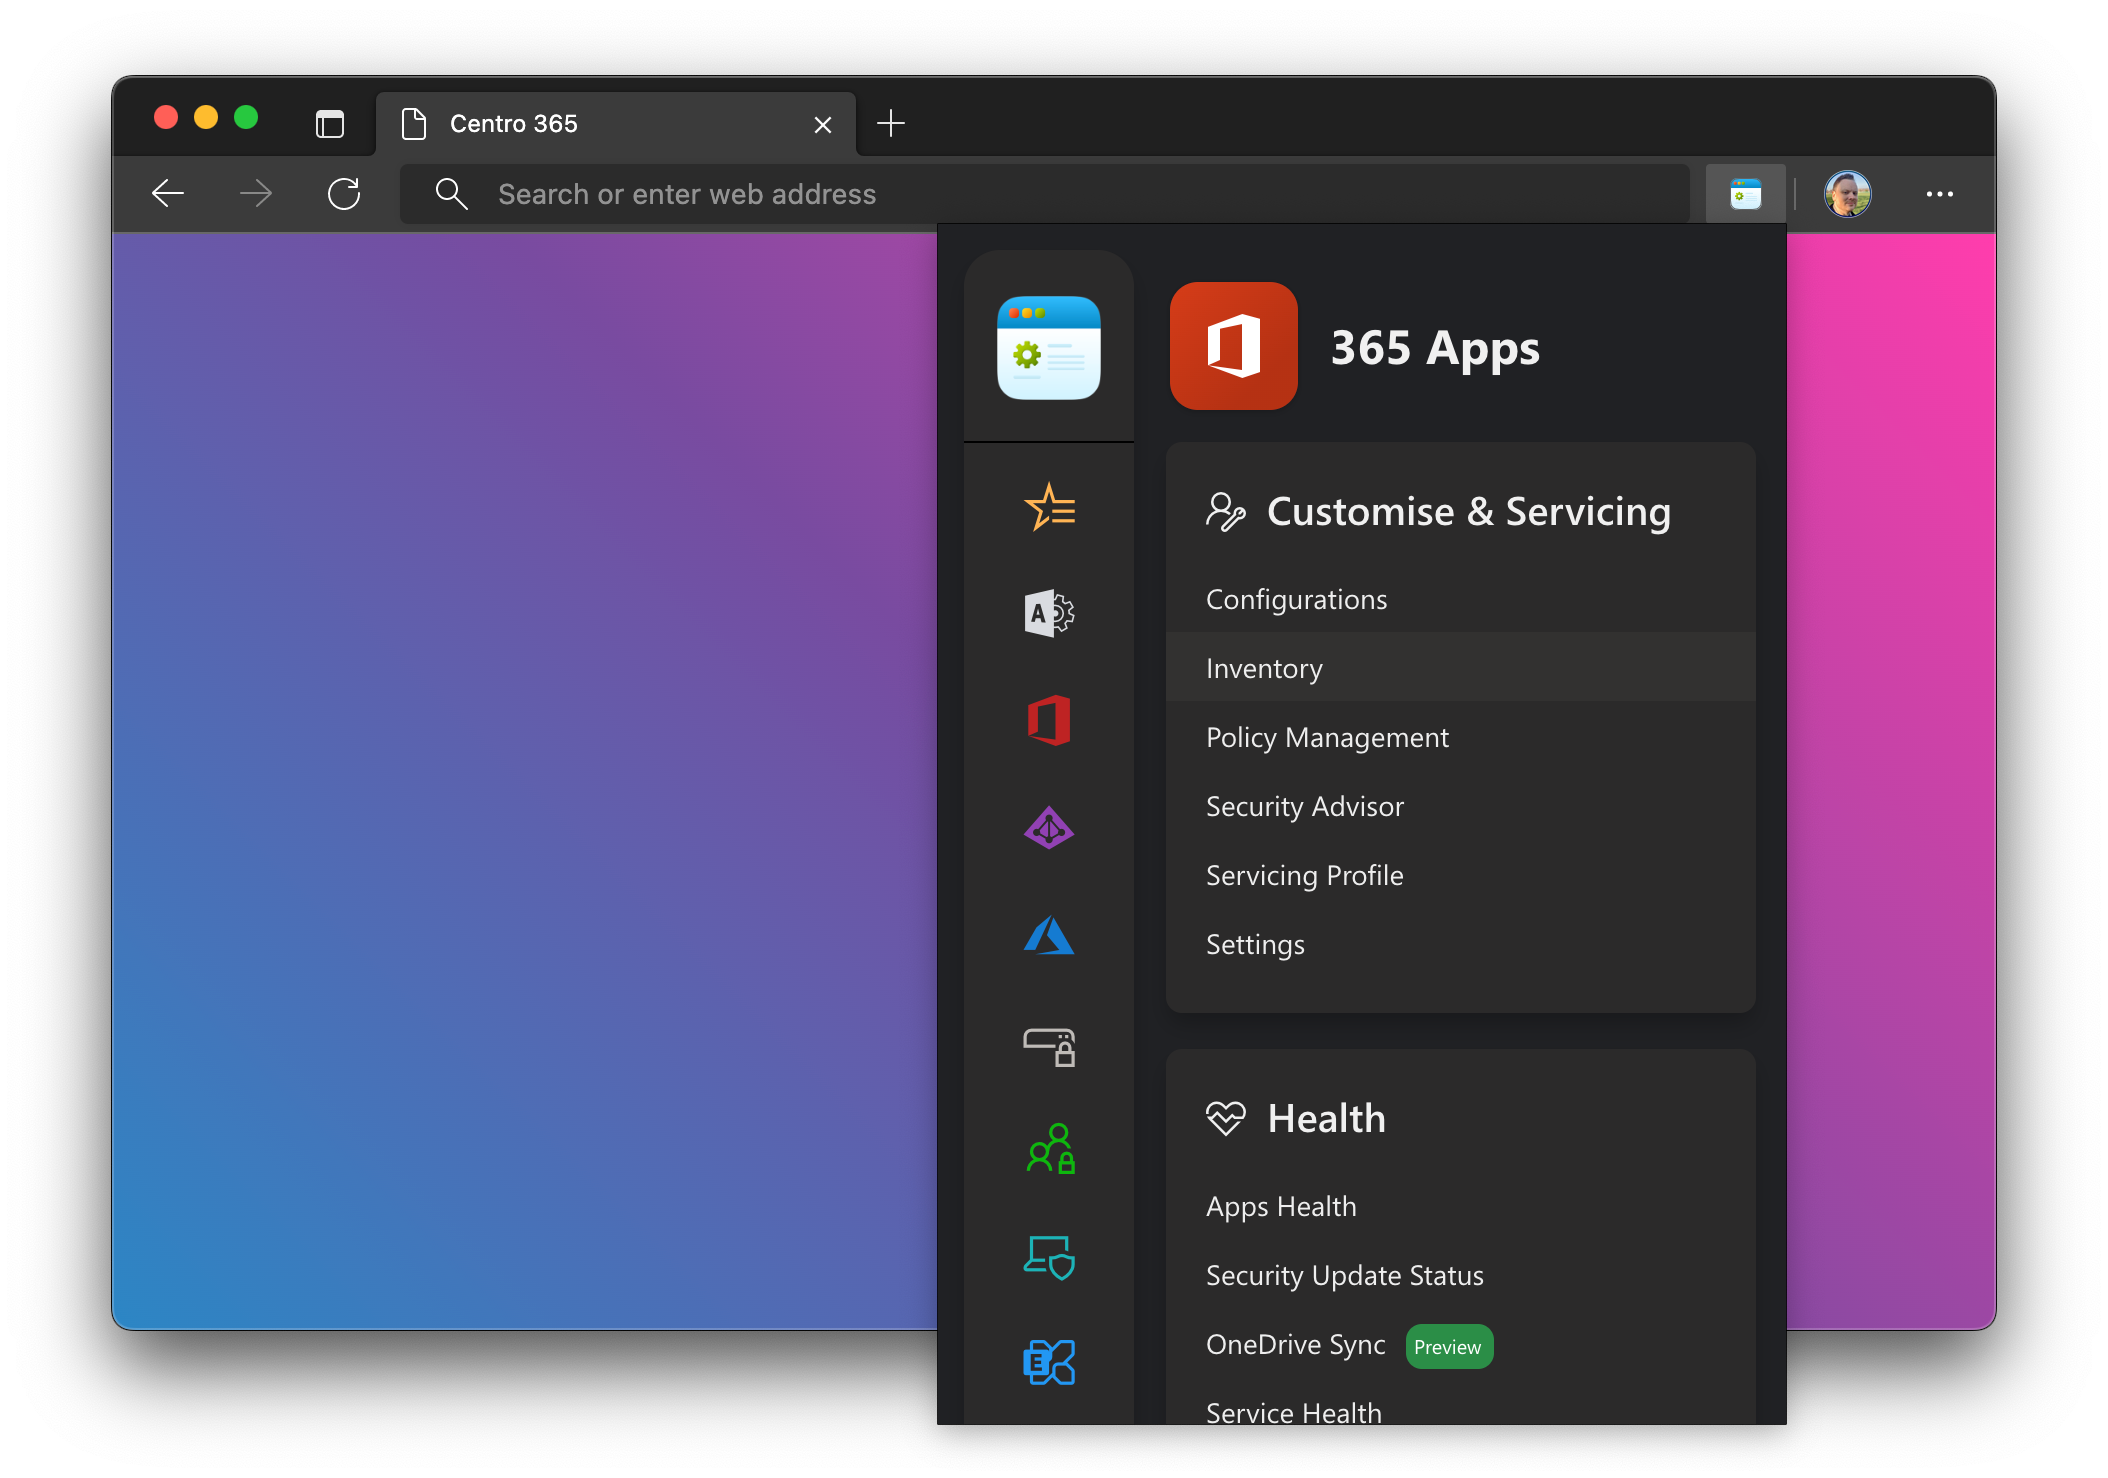 Centro 365 automatically switches between light and dark mode